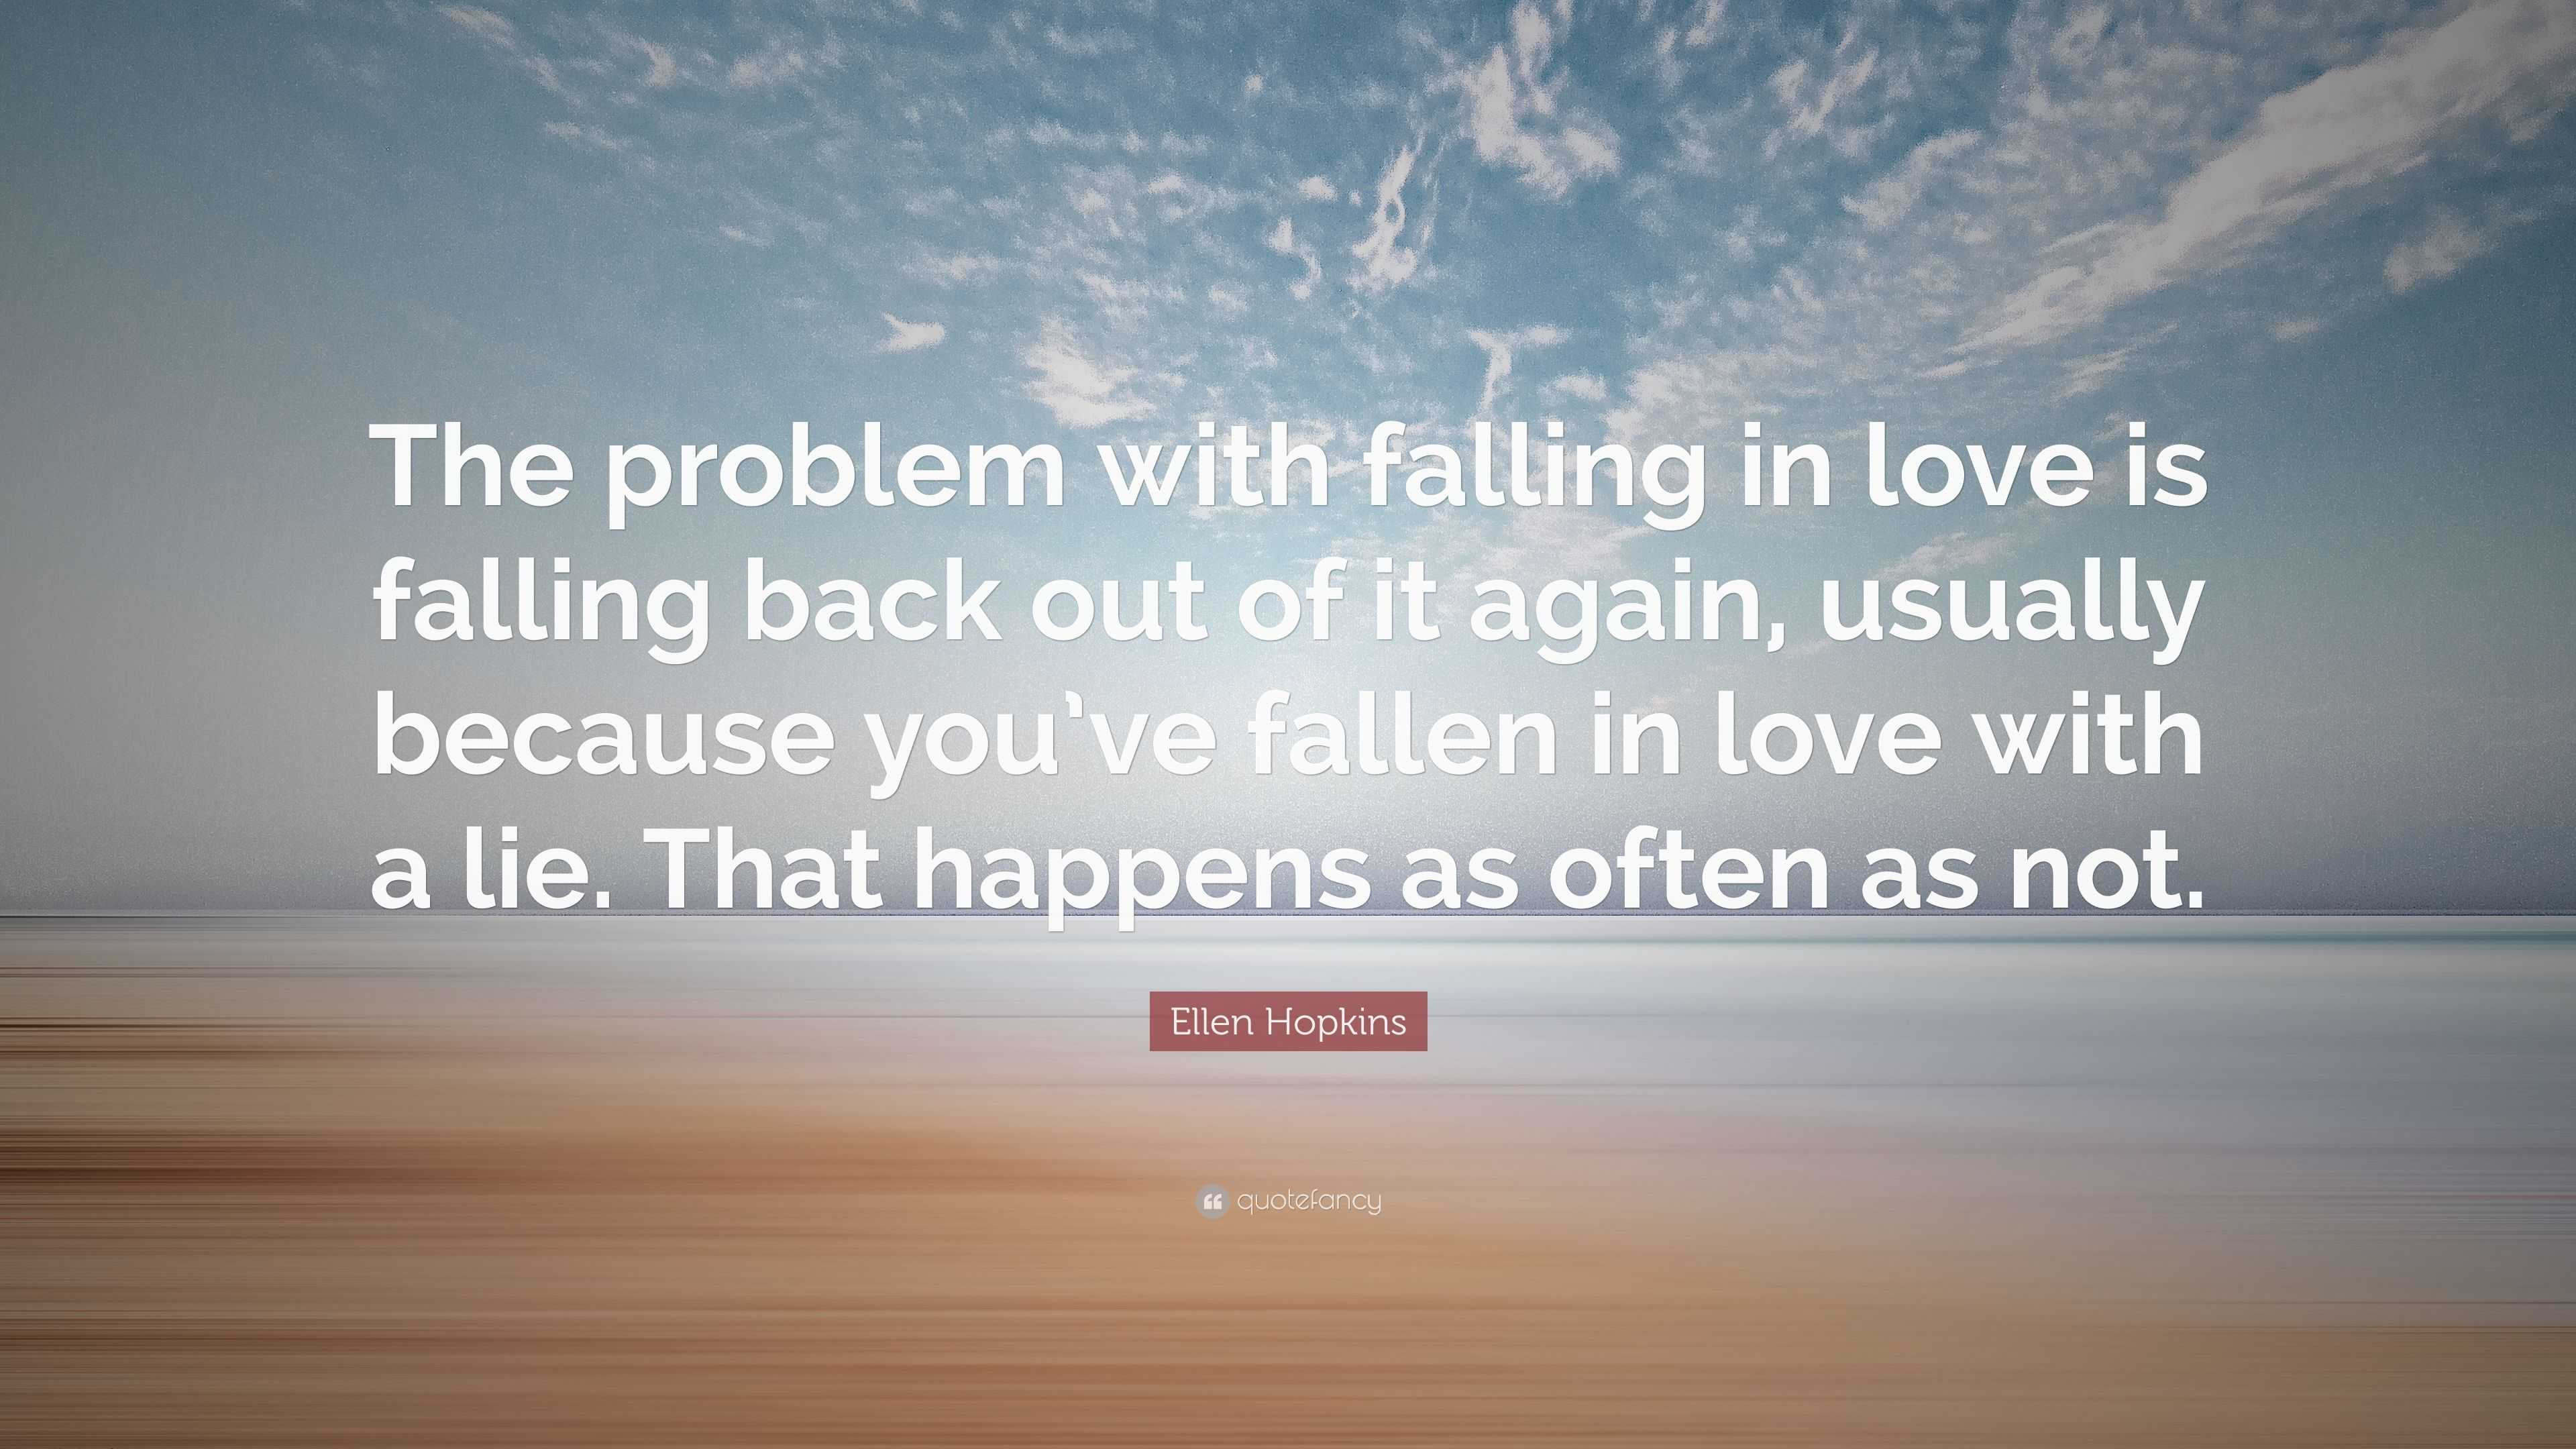 Ellen Hopkins Quote “The problem with falling in love is falling back out of